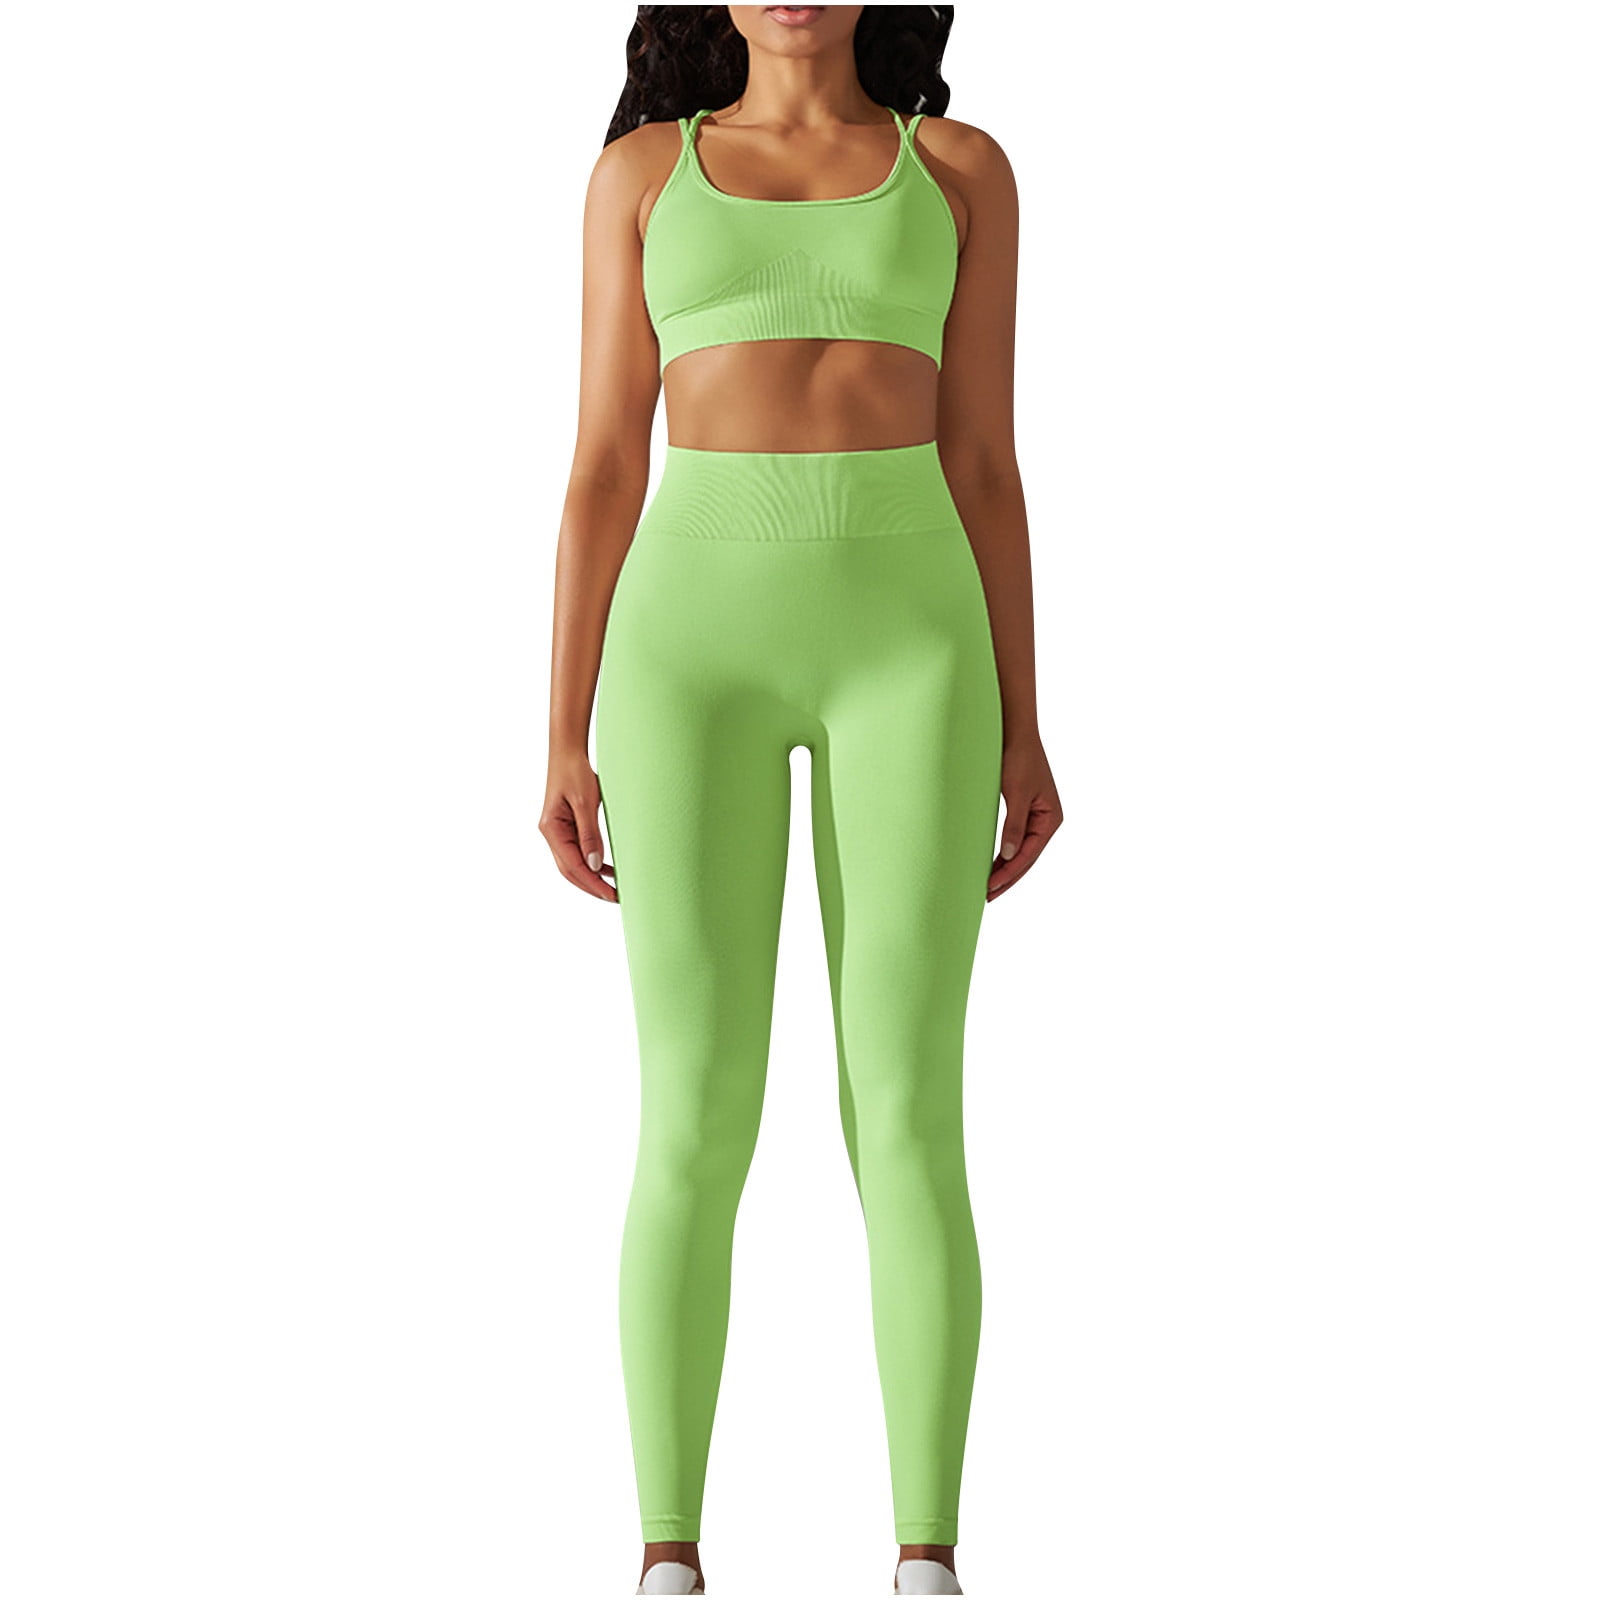 AherBiu Yoga Sets for Women Short Tracksuits Stretchy Two Piece